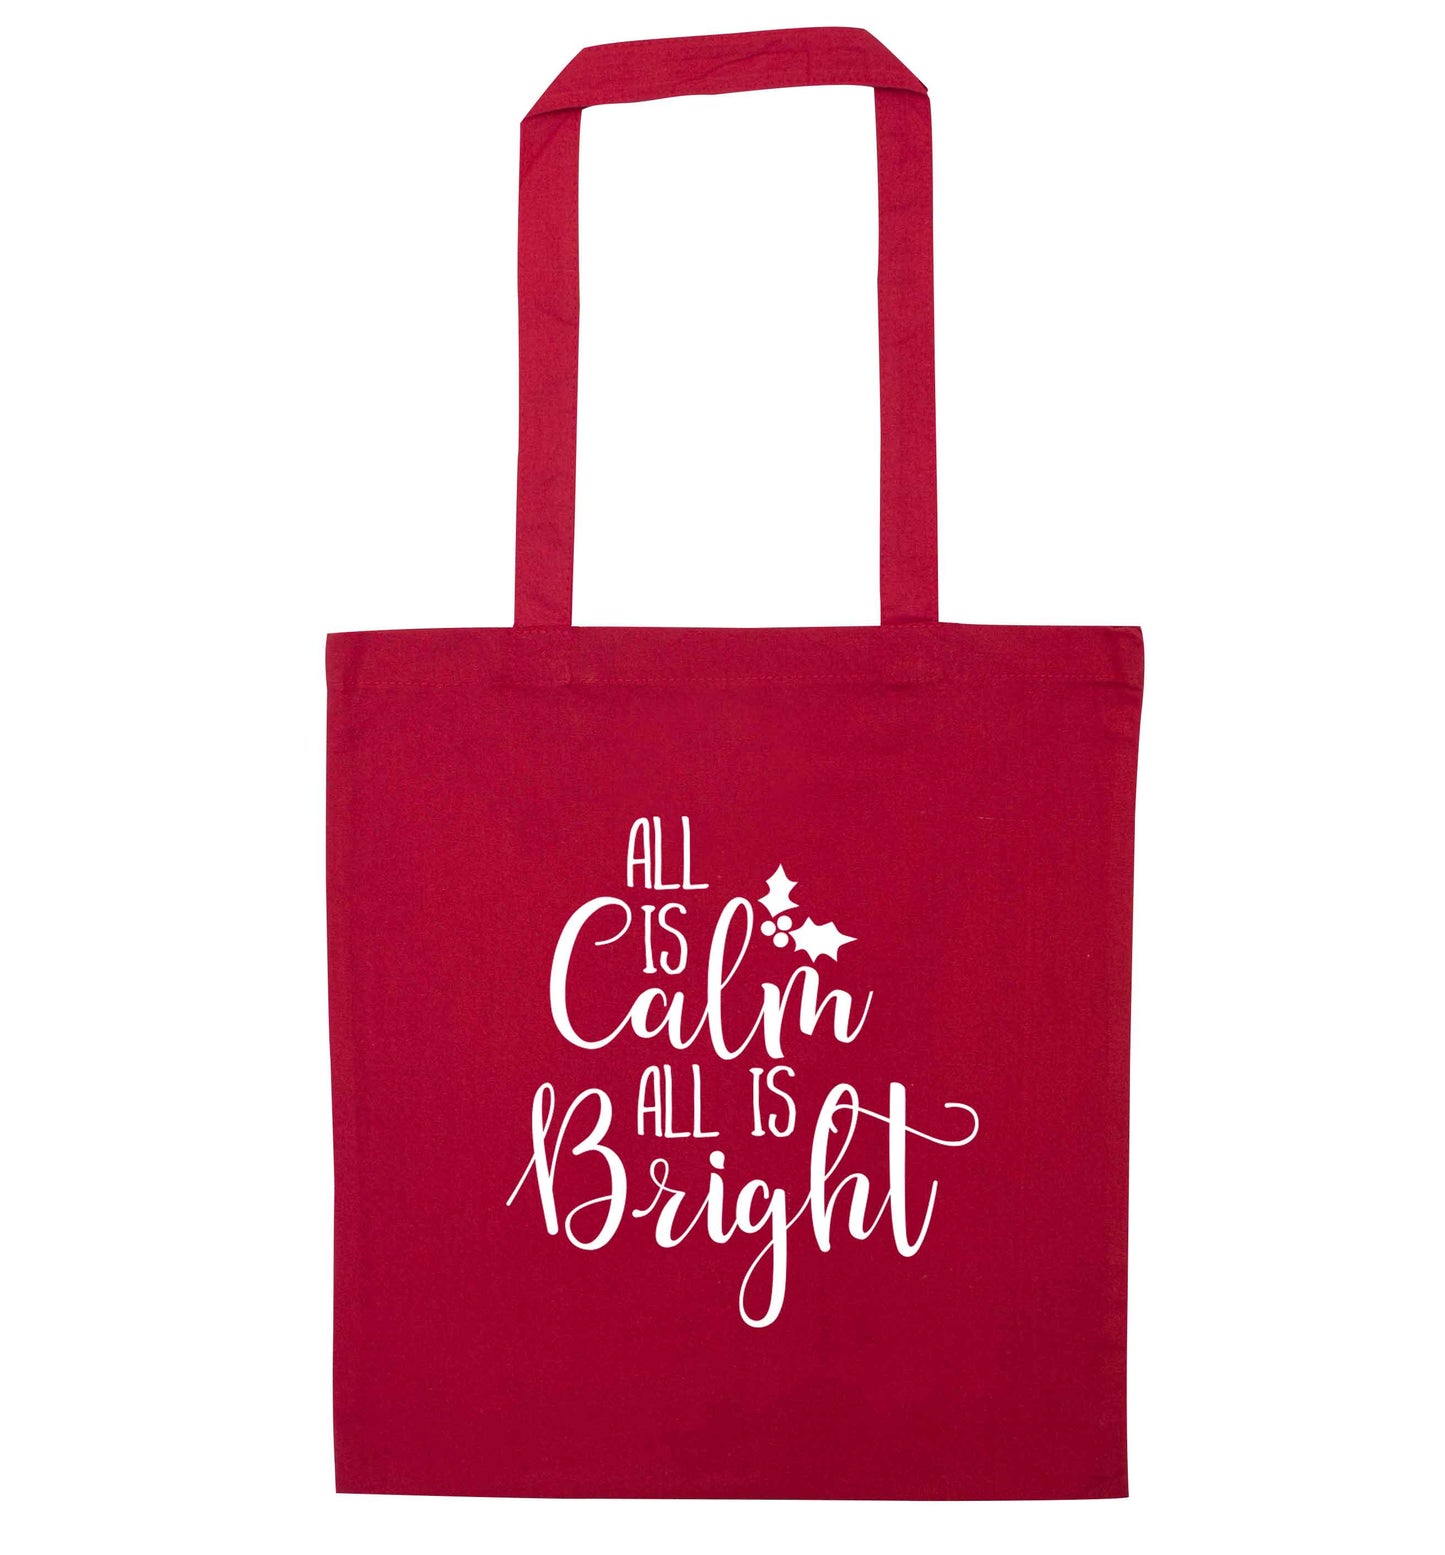 All is calm is bright red tote bag